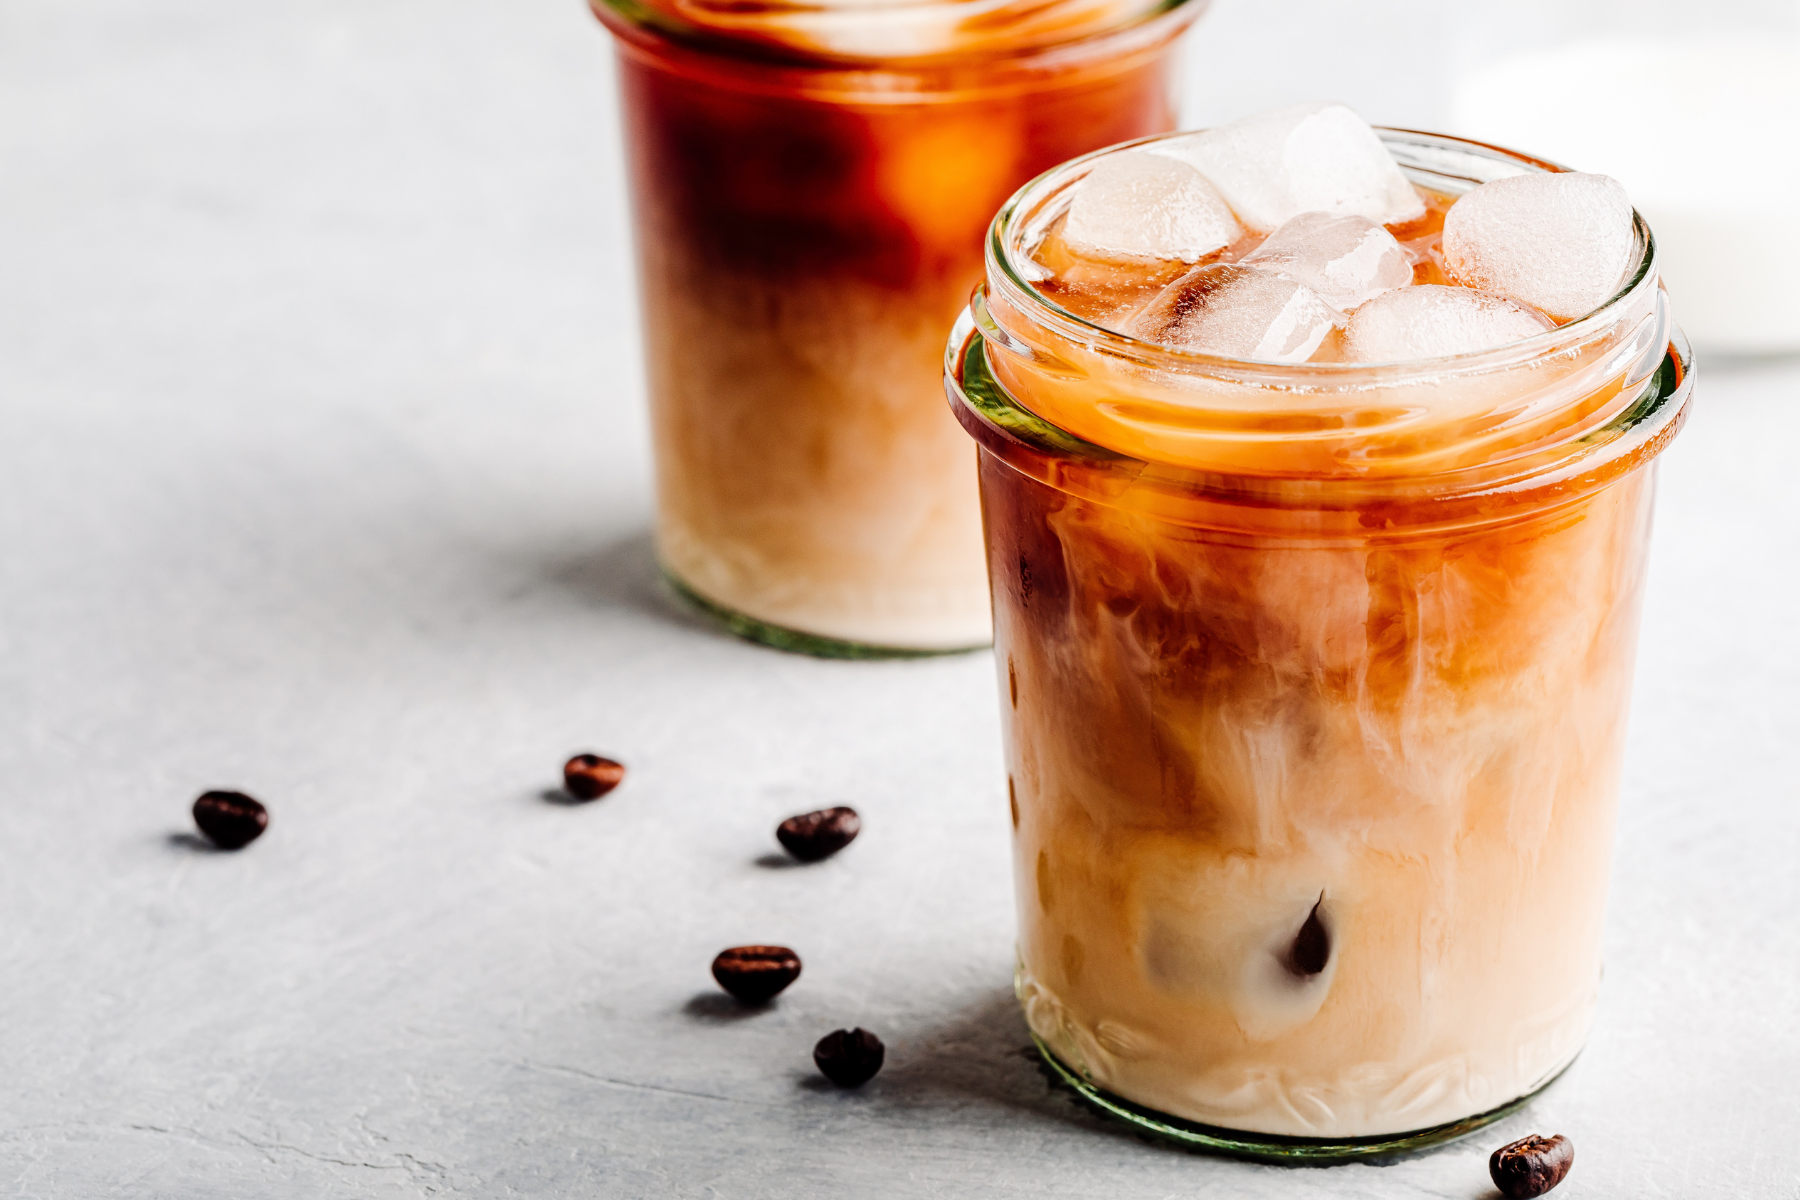 How to Make the Perfect Cold Brew Coffee at Home